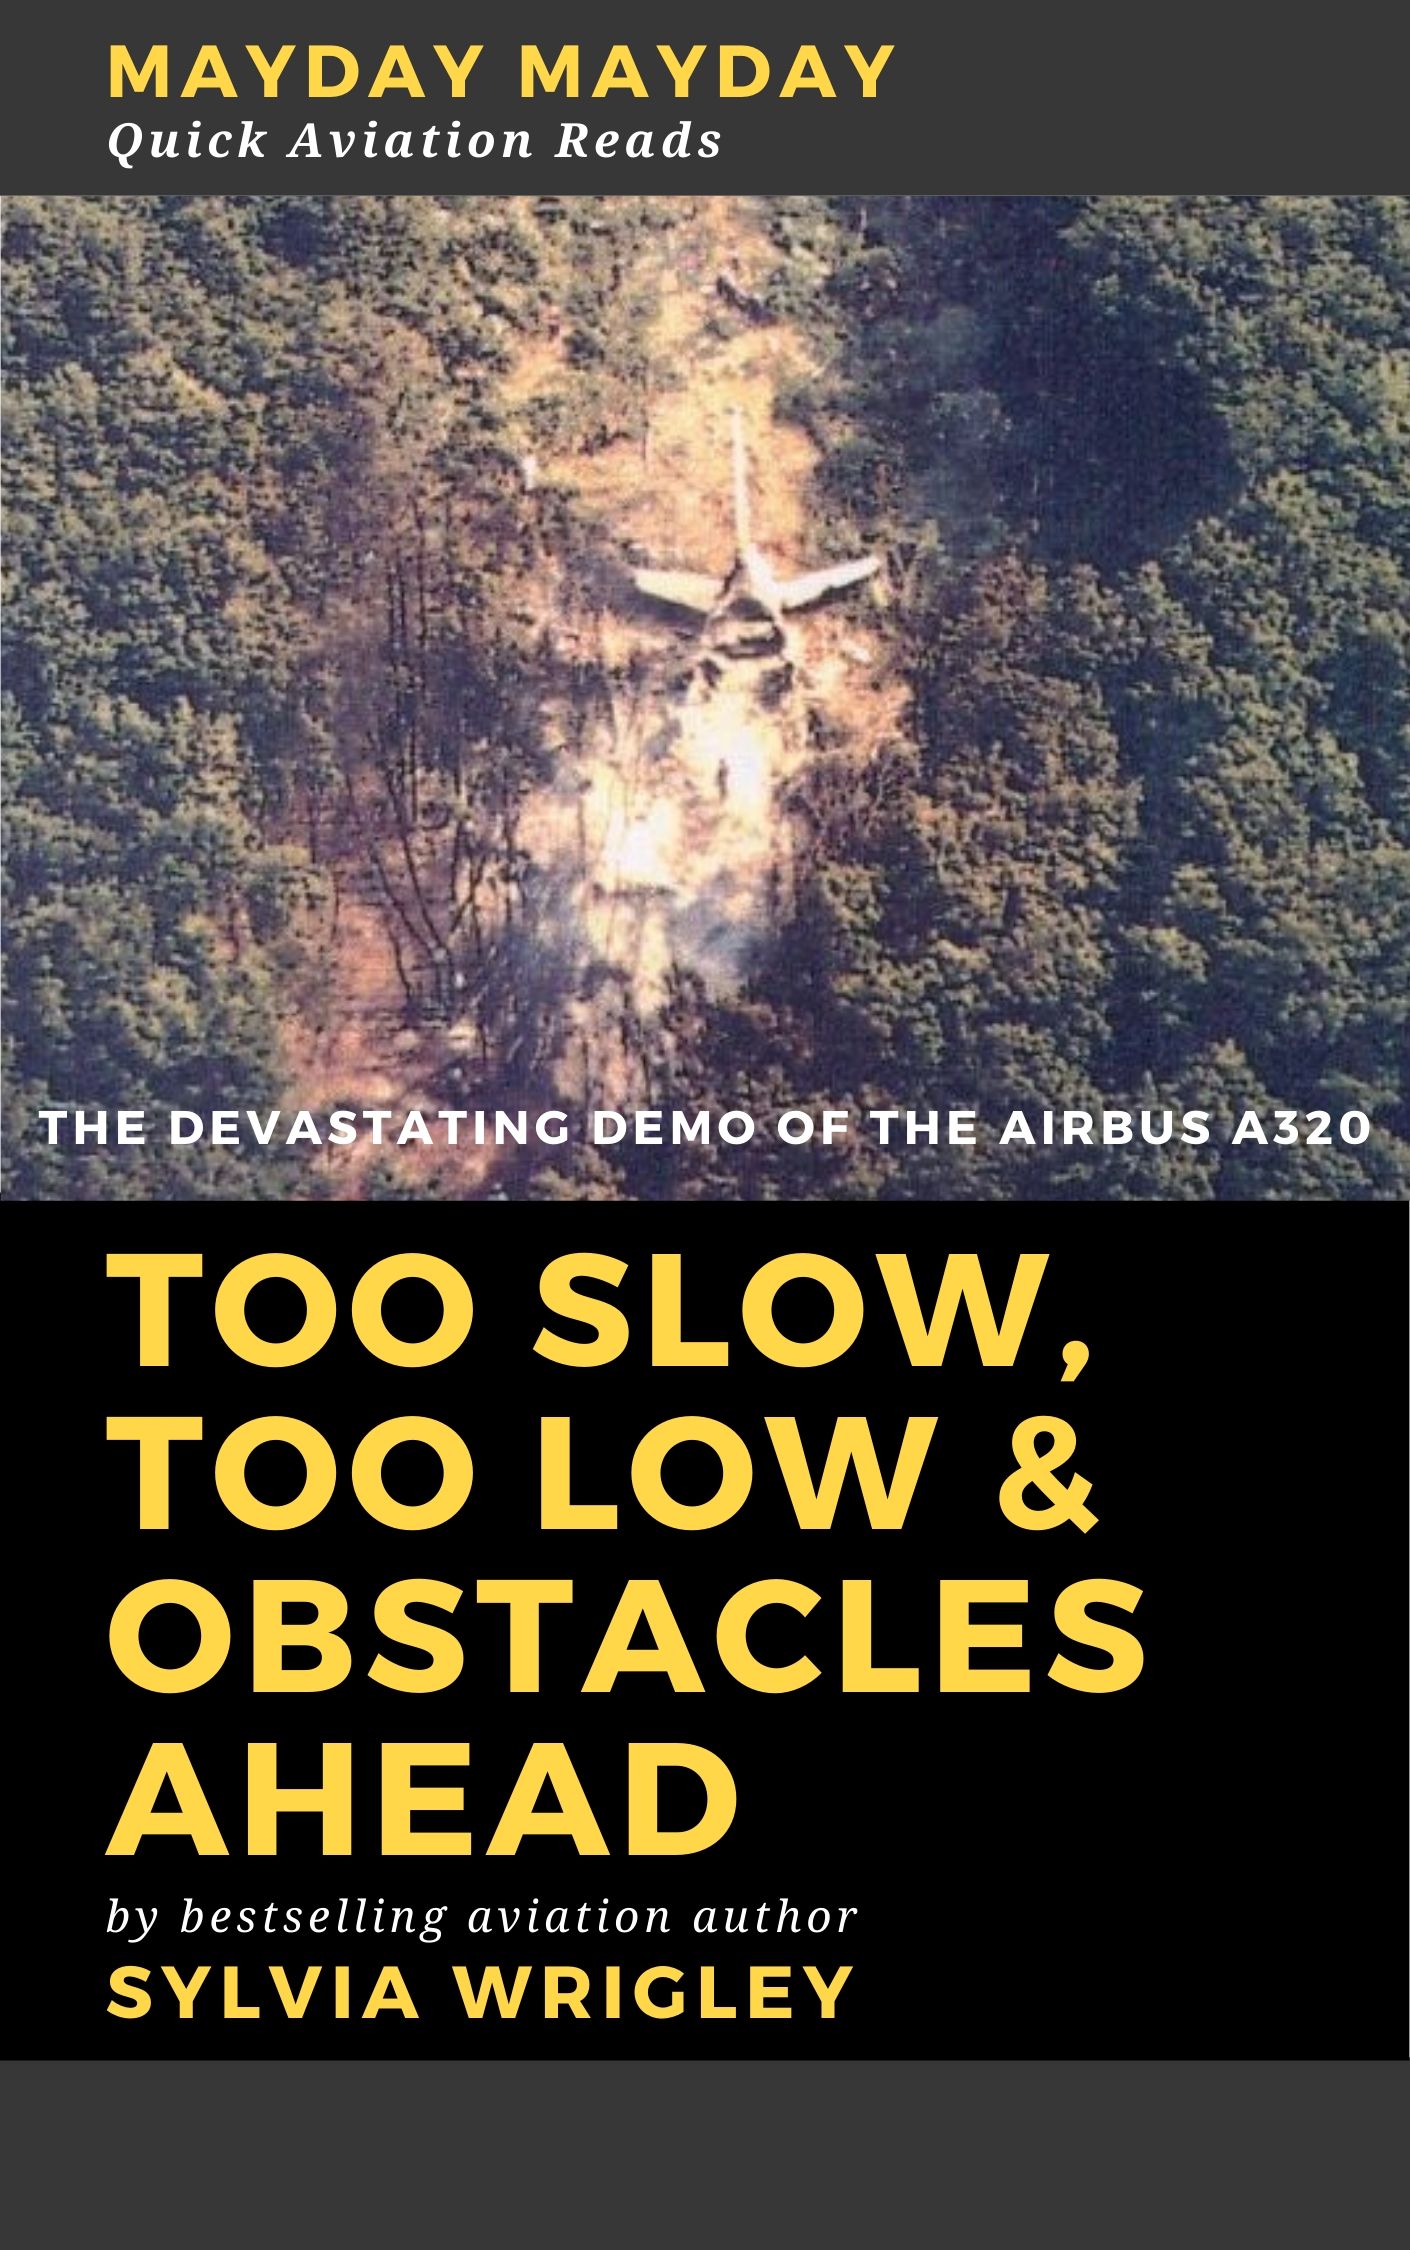 Too Slow, Too Low & Obstacles Ahead: The Devastating Demo of the Airbus 320